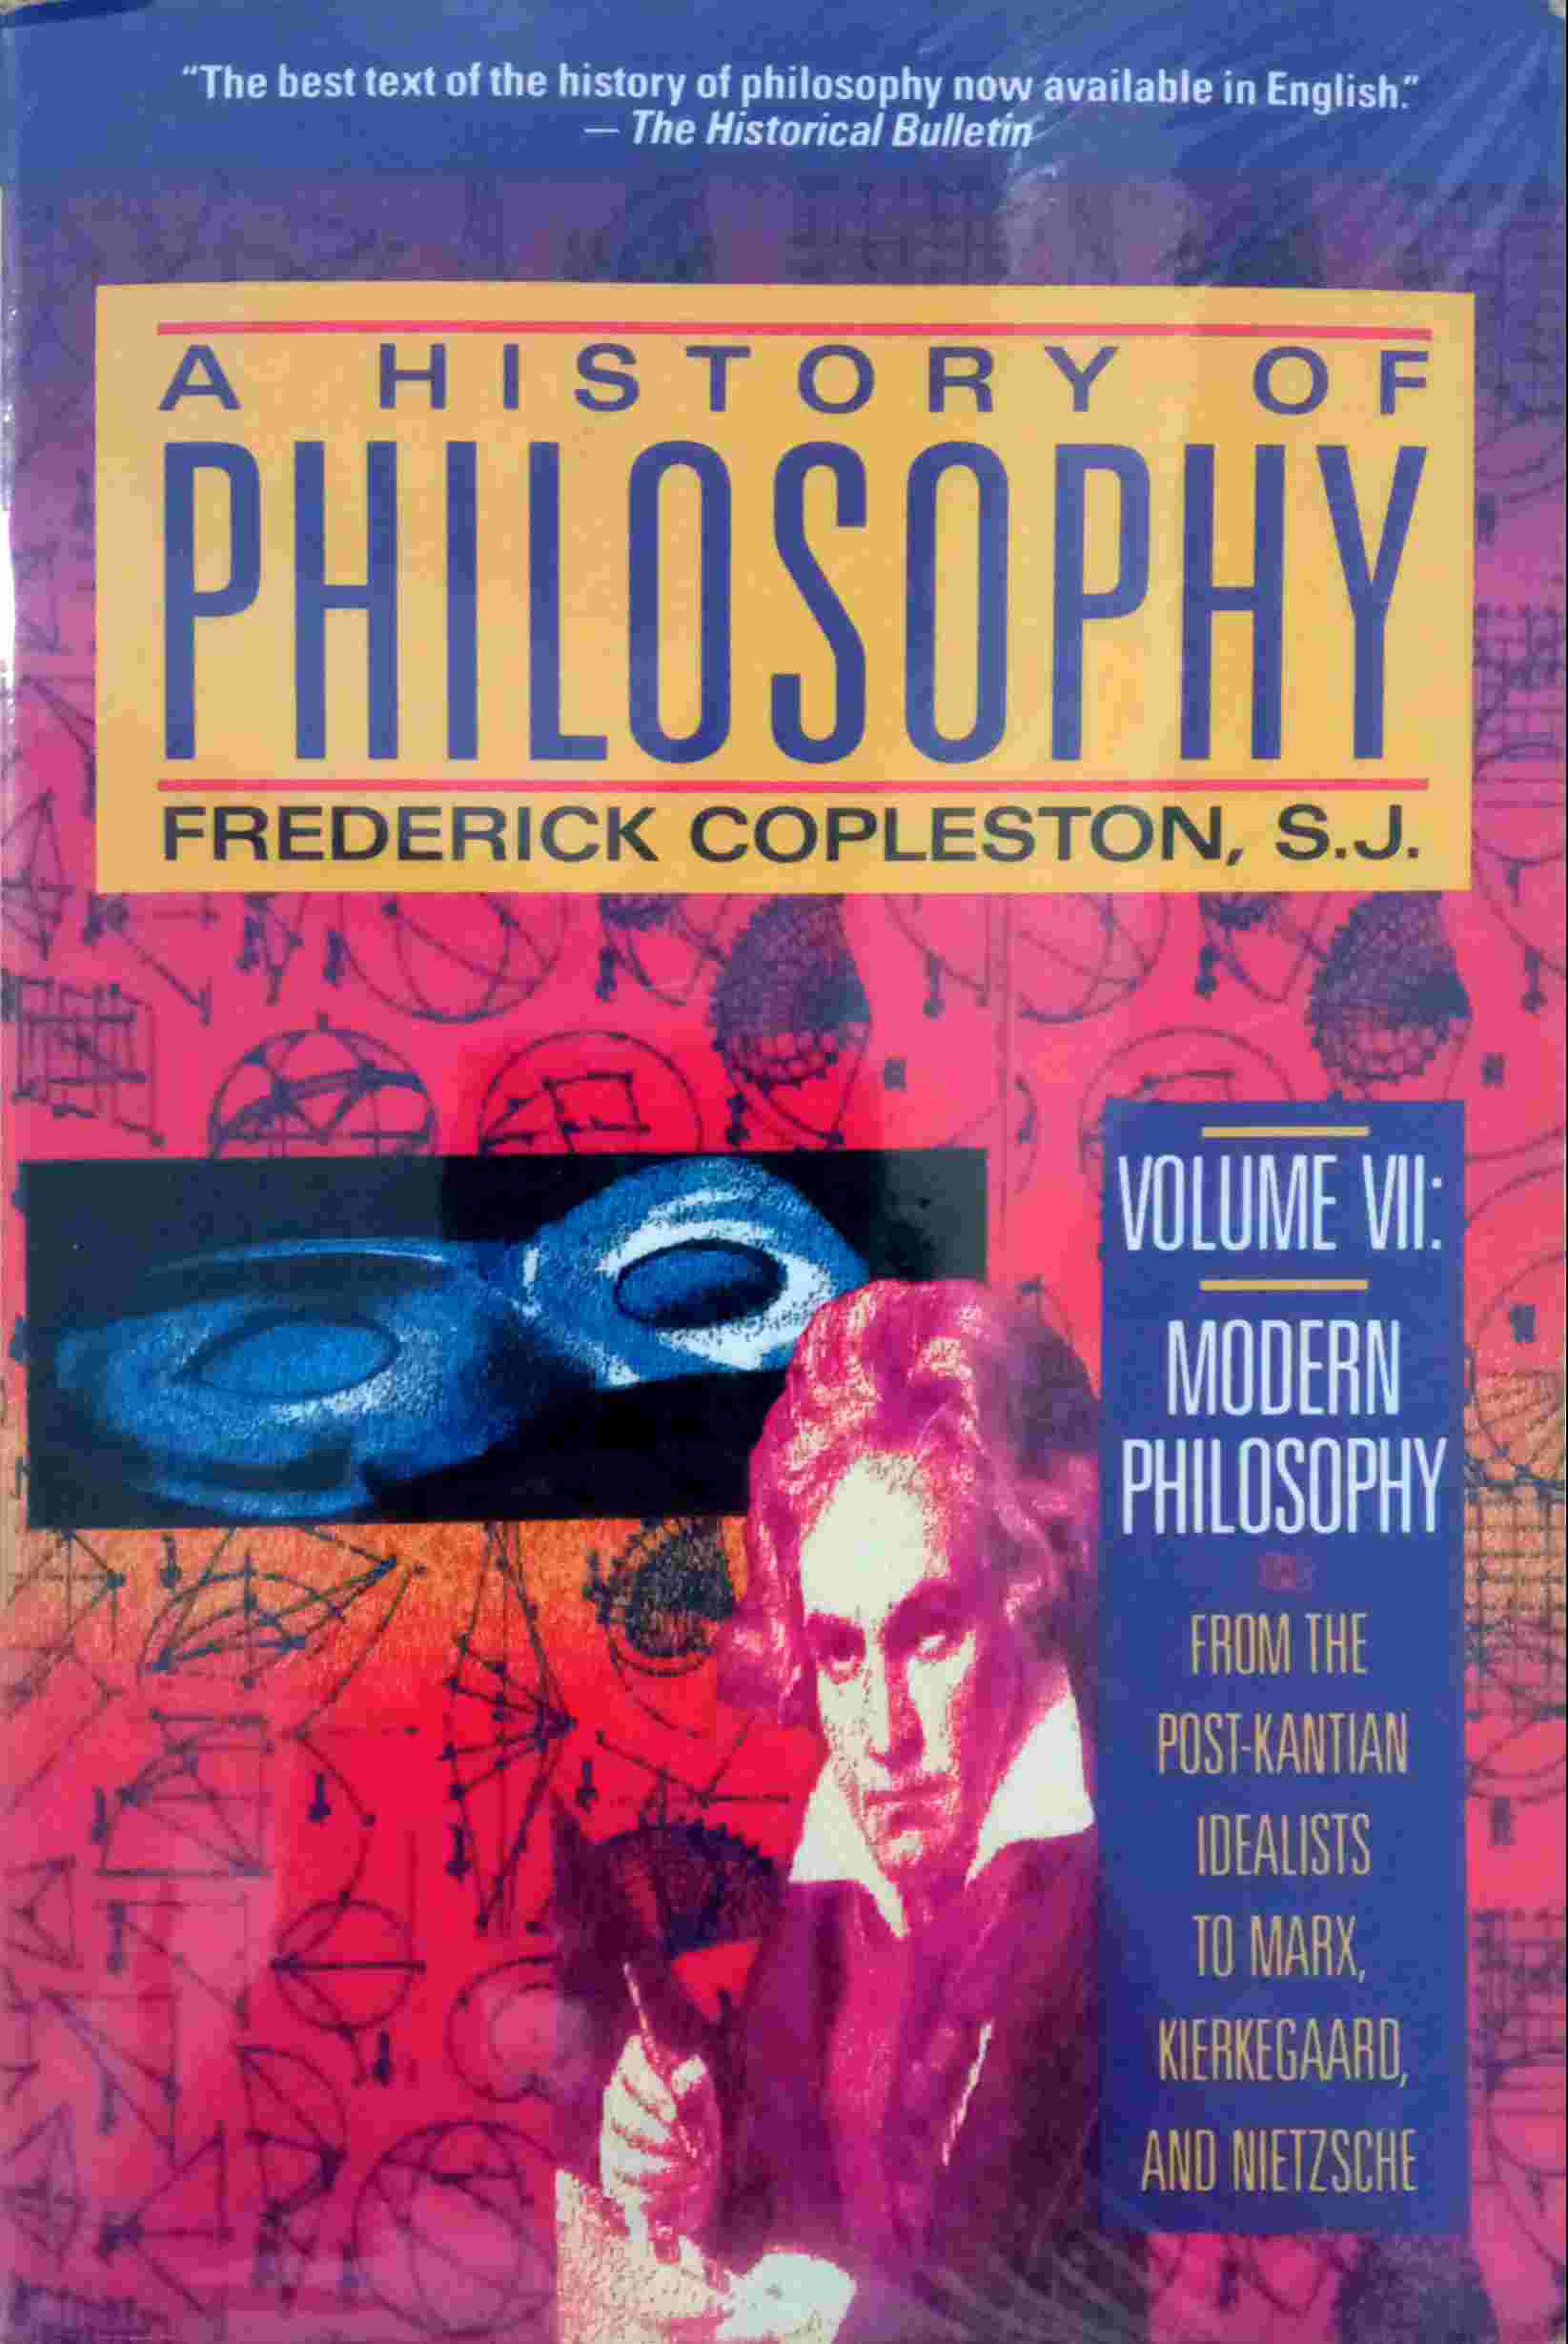 A HISTORY OF PHILOSOPHY: MODERN PHILOSOPHY: FROM THE POST-KANTIAN IDEALISTS TO MARX, KIERKEGAARD, AND NIETSCHE